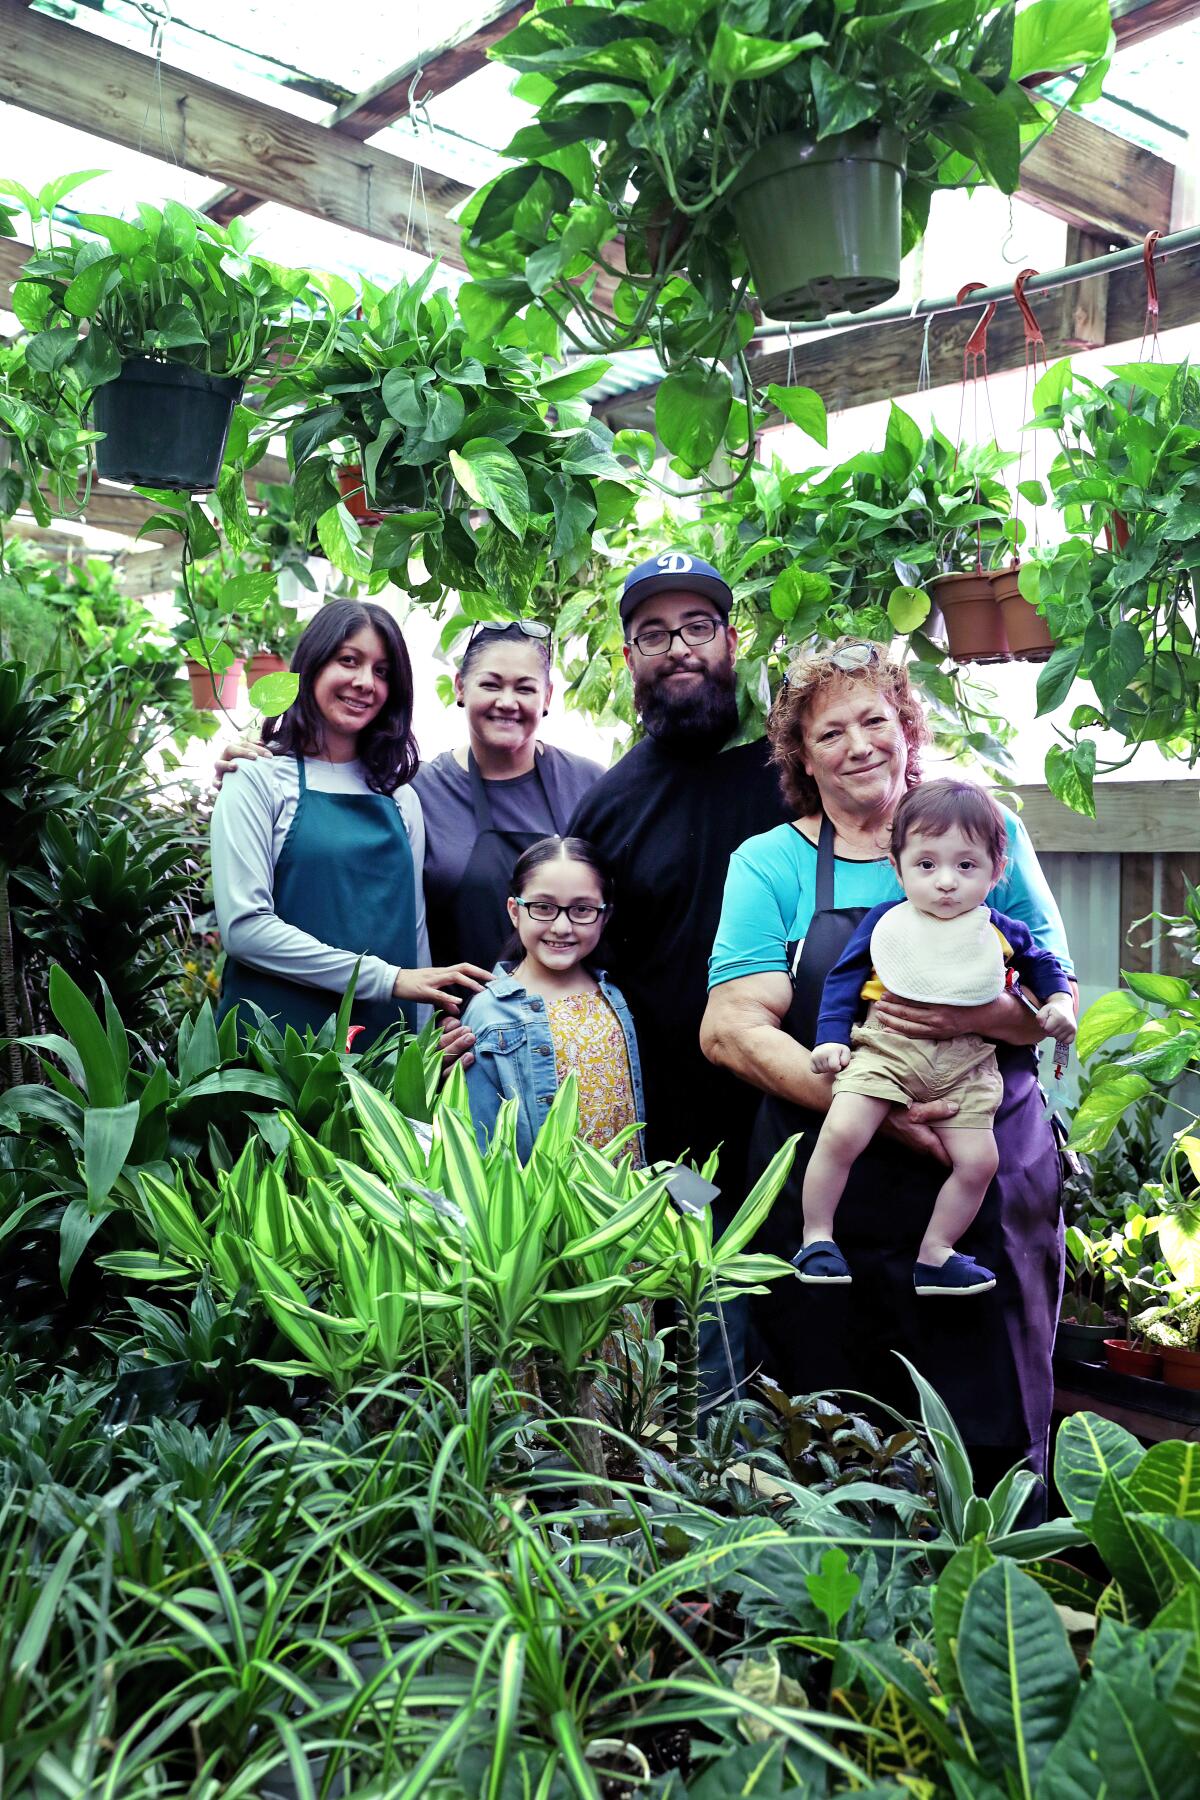 Matriarch Maria Hurtado Lopez and her family surrounded by plants.